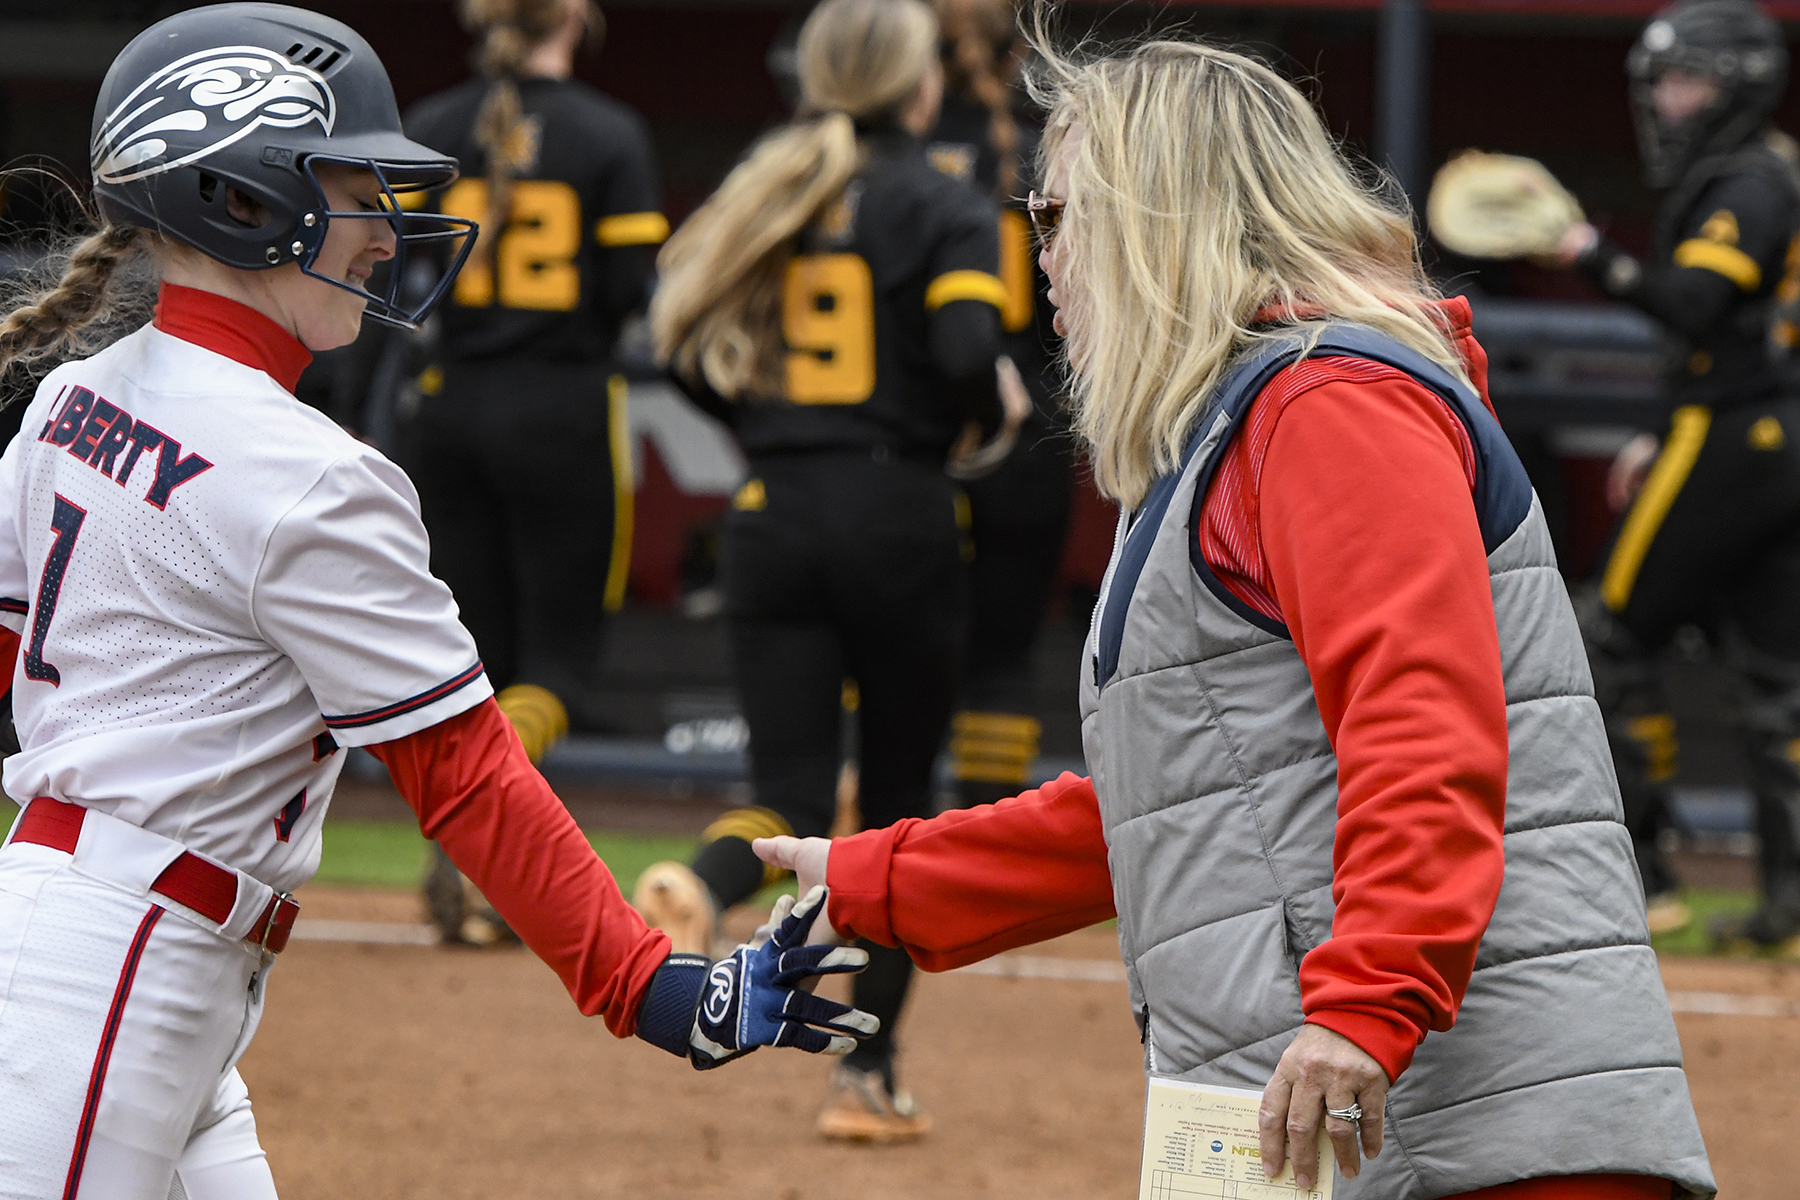 Liberty softball begins ASUN Tournament looking for 2nd straight title